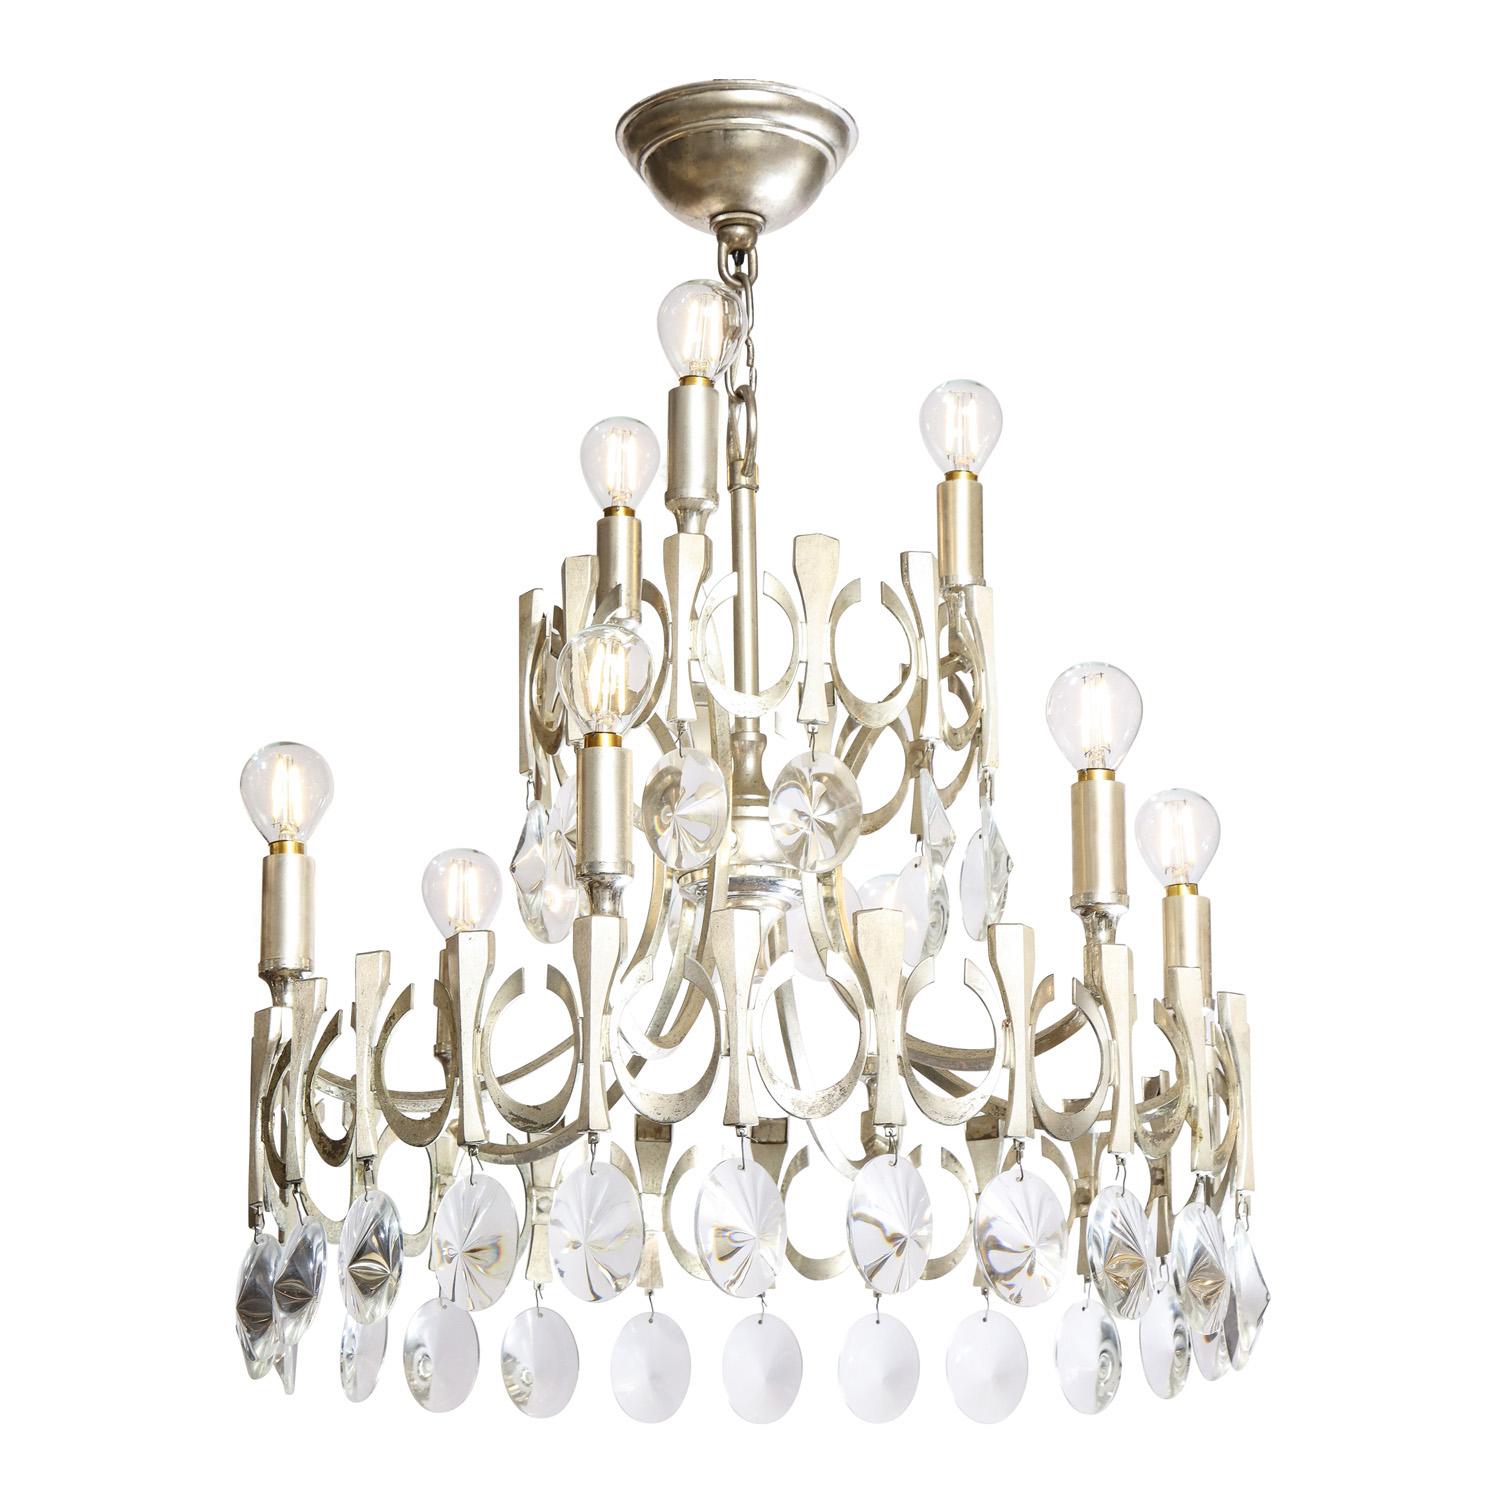 Elegant round chandelier in antiqued nickel with glass crystals at bottom by Sciolari, Italian 1950's. This was rarely done in antiqued nickel. A beautiful chandelier.
 